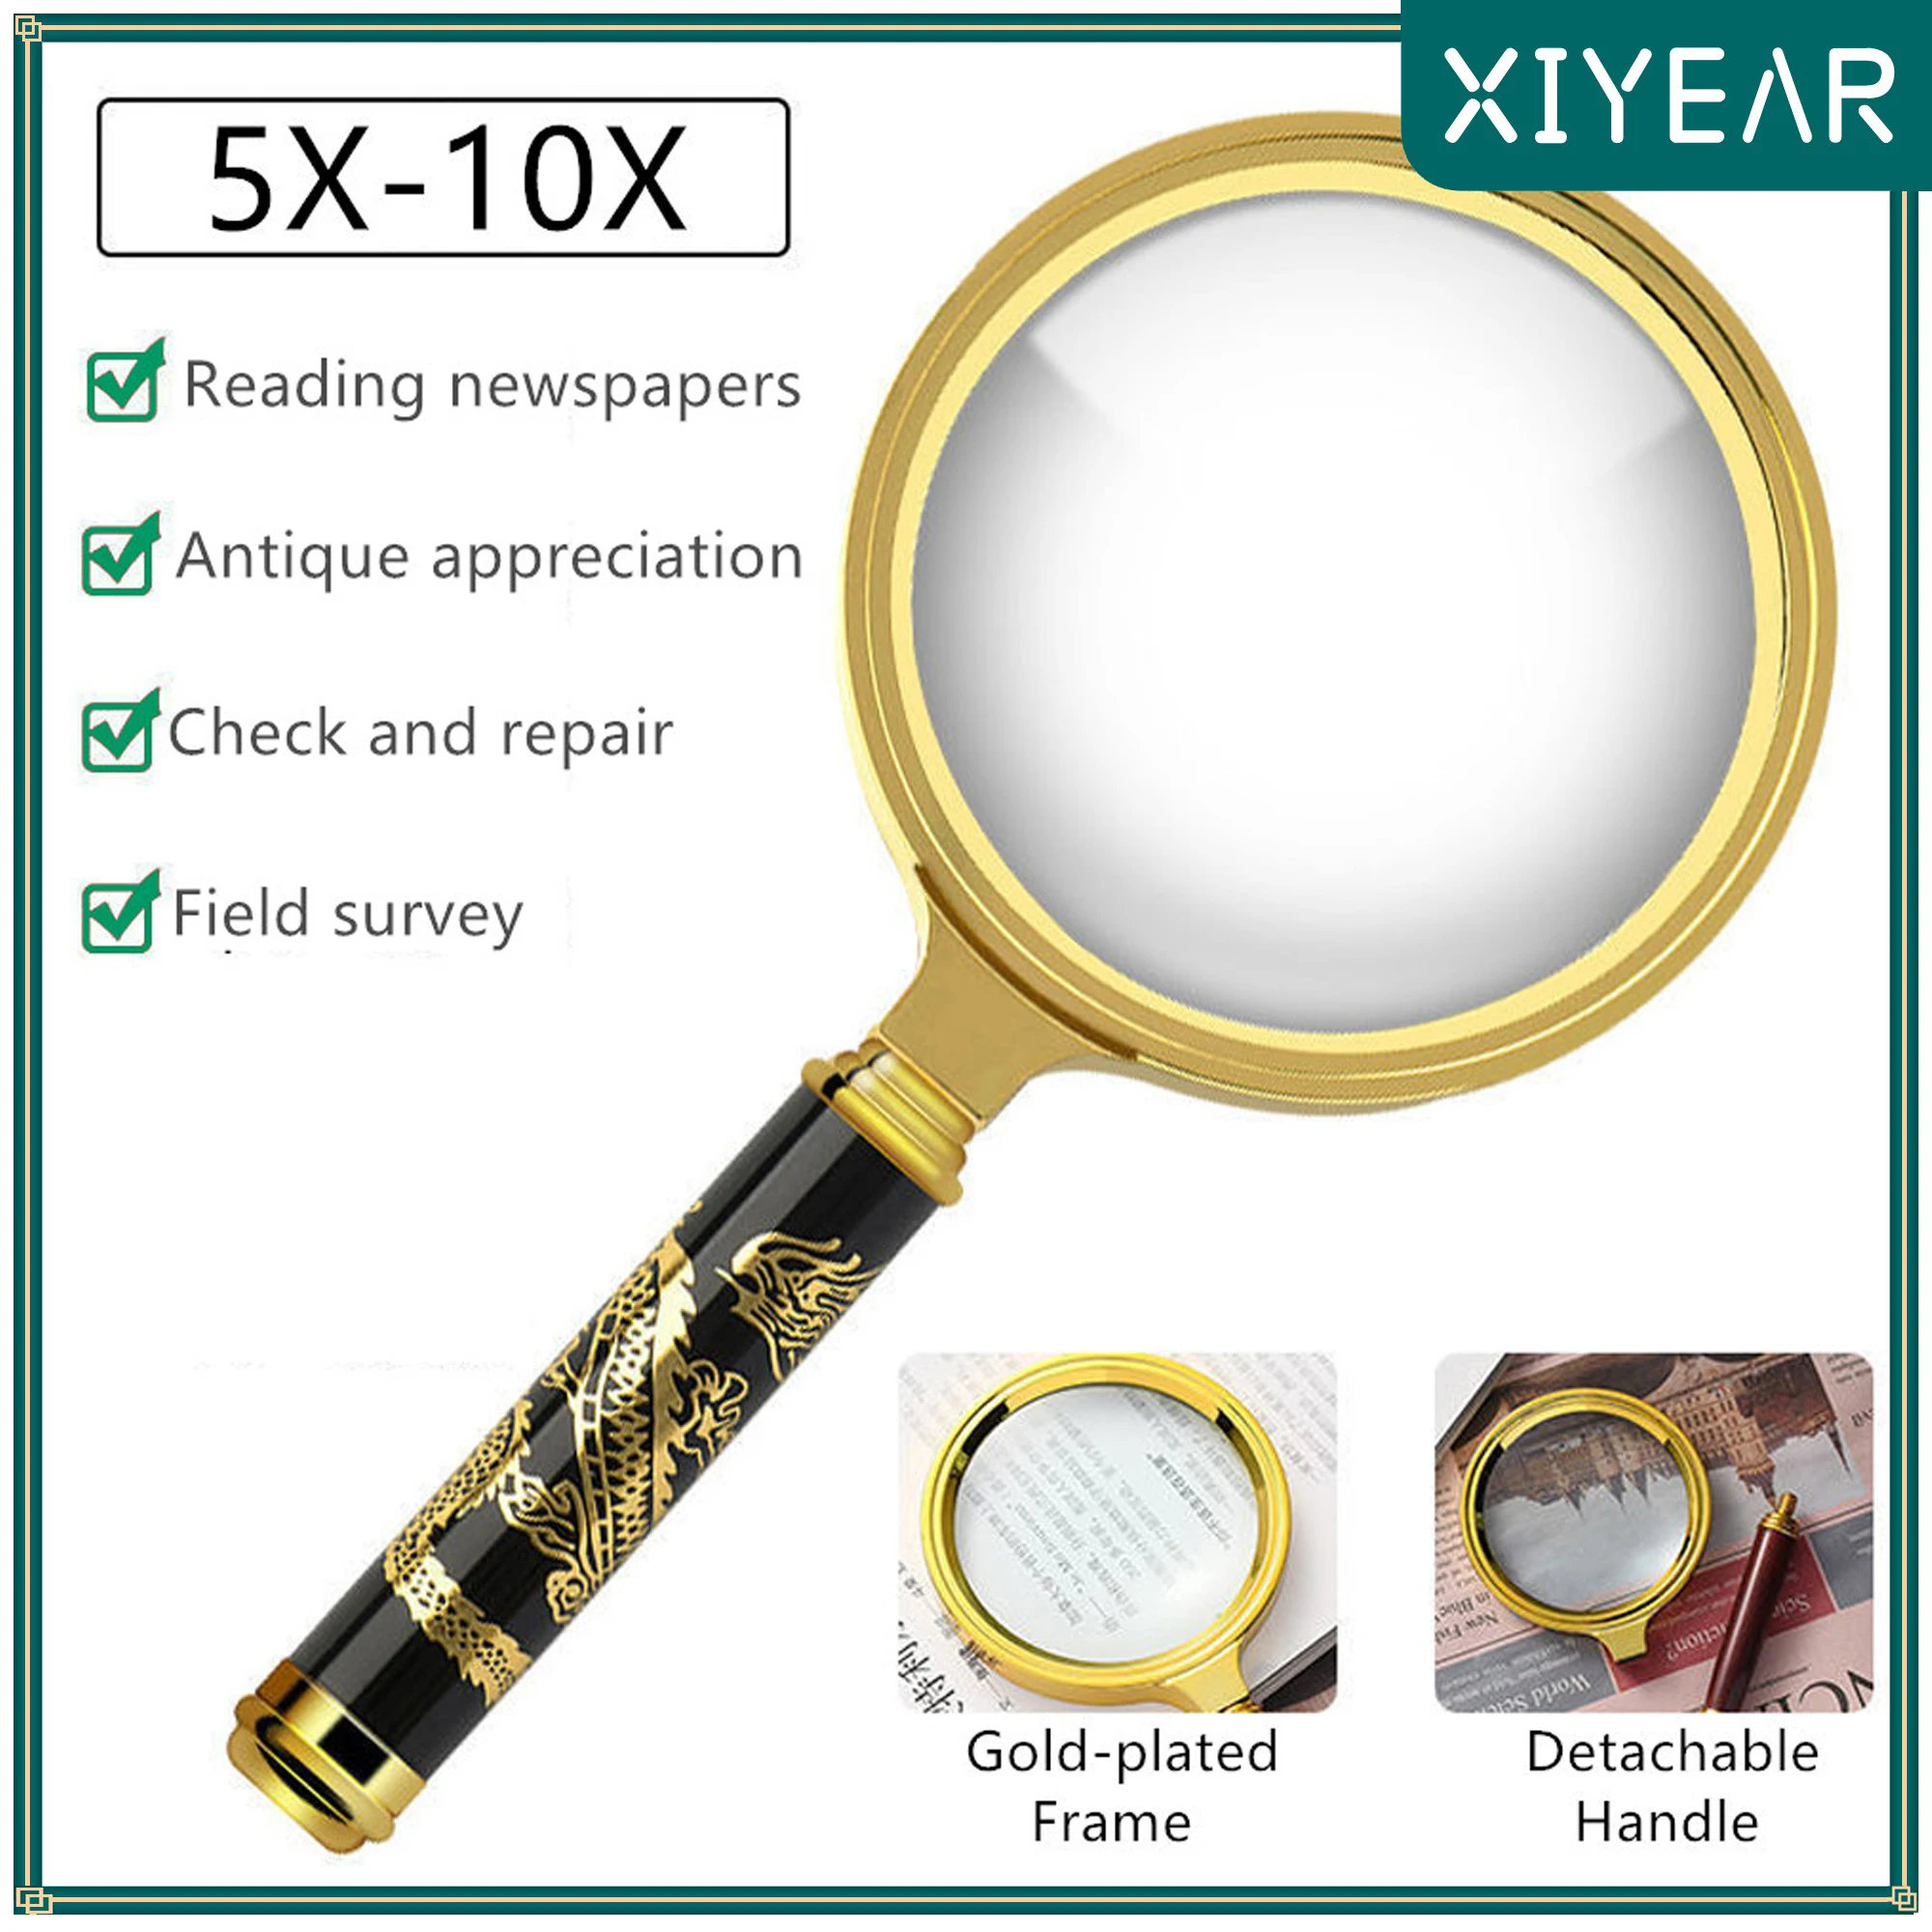 

5X-10X Magnifying Glass Golden Dragon Handle Magnifier Mini Pocket Handheld Microscope Reading Jewelry Loupe Magnifiers